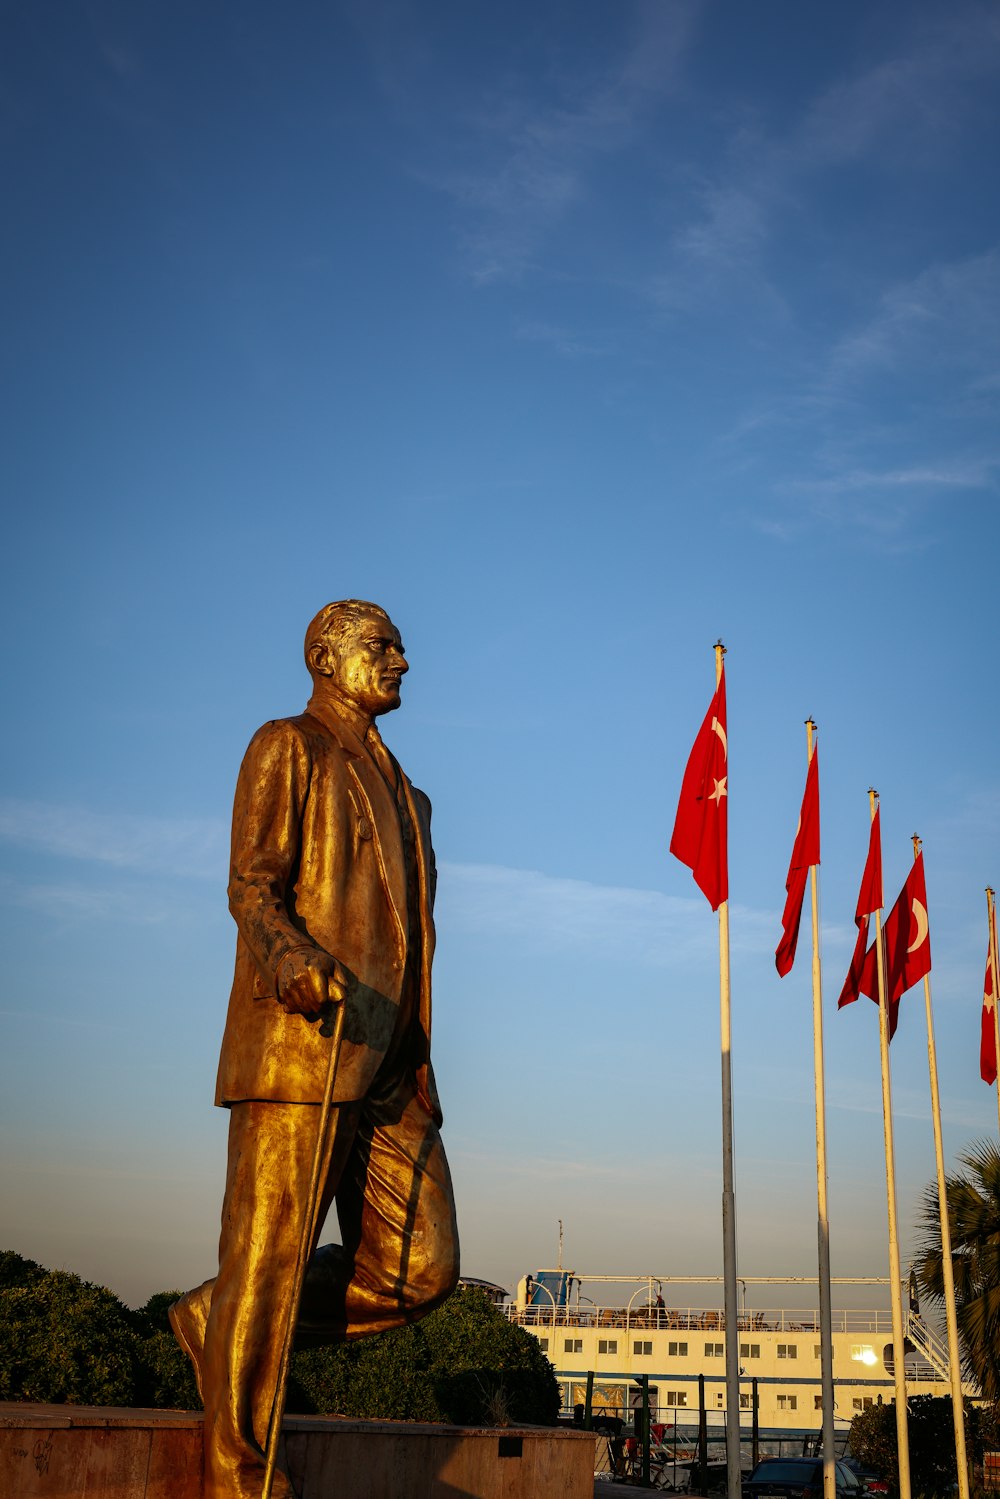 a statue of a man holding a cane in front of flags